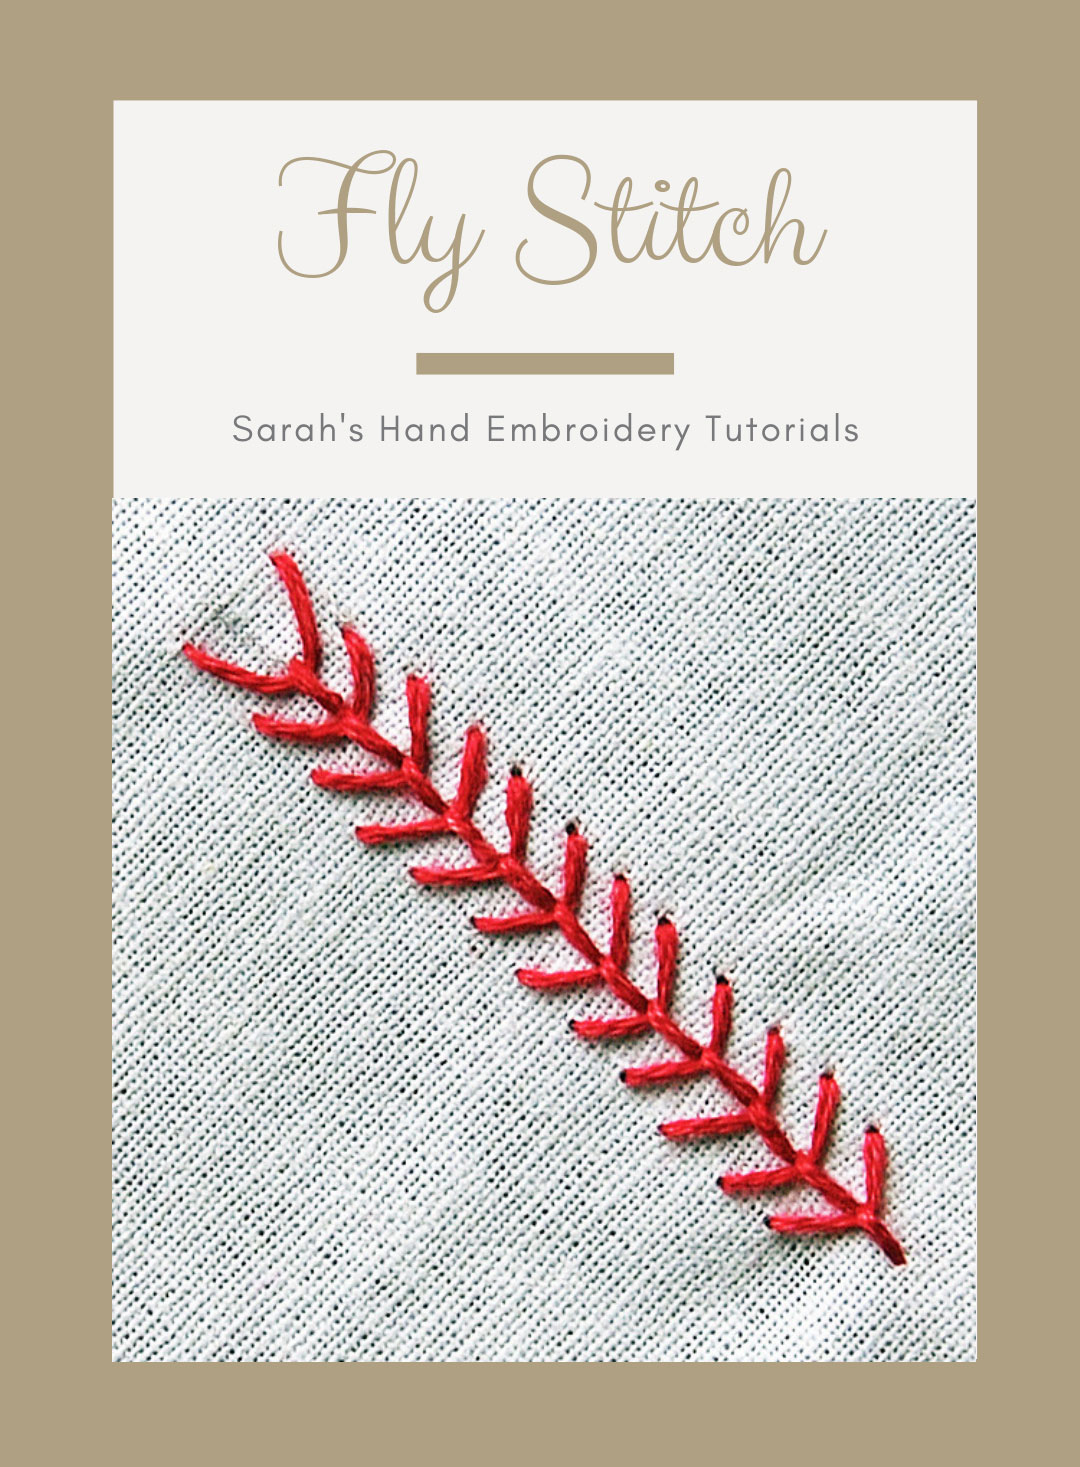 Hand Embroidery Patterns Book 1 - Sarah's Hand Embroidery Tutorials